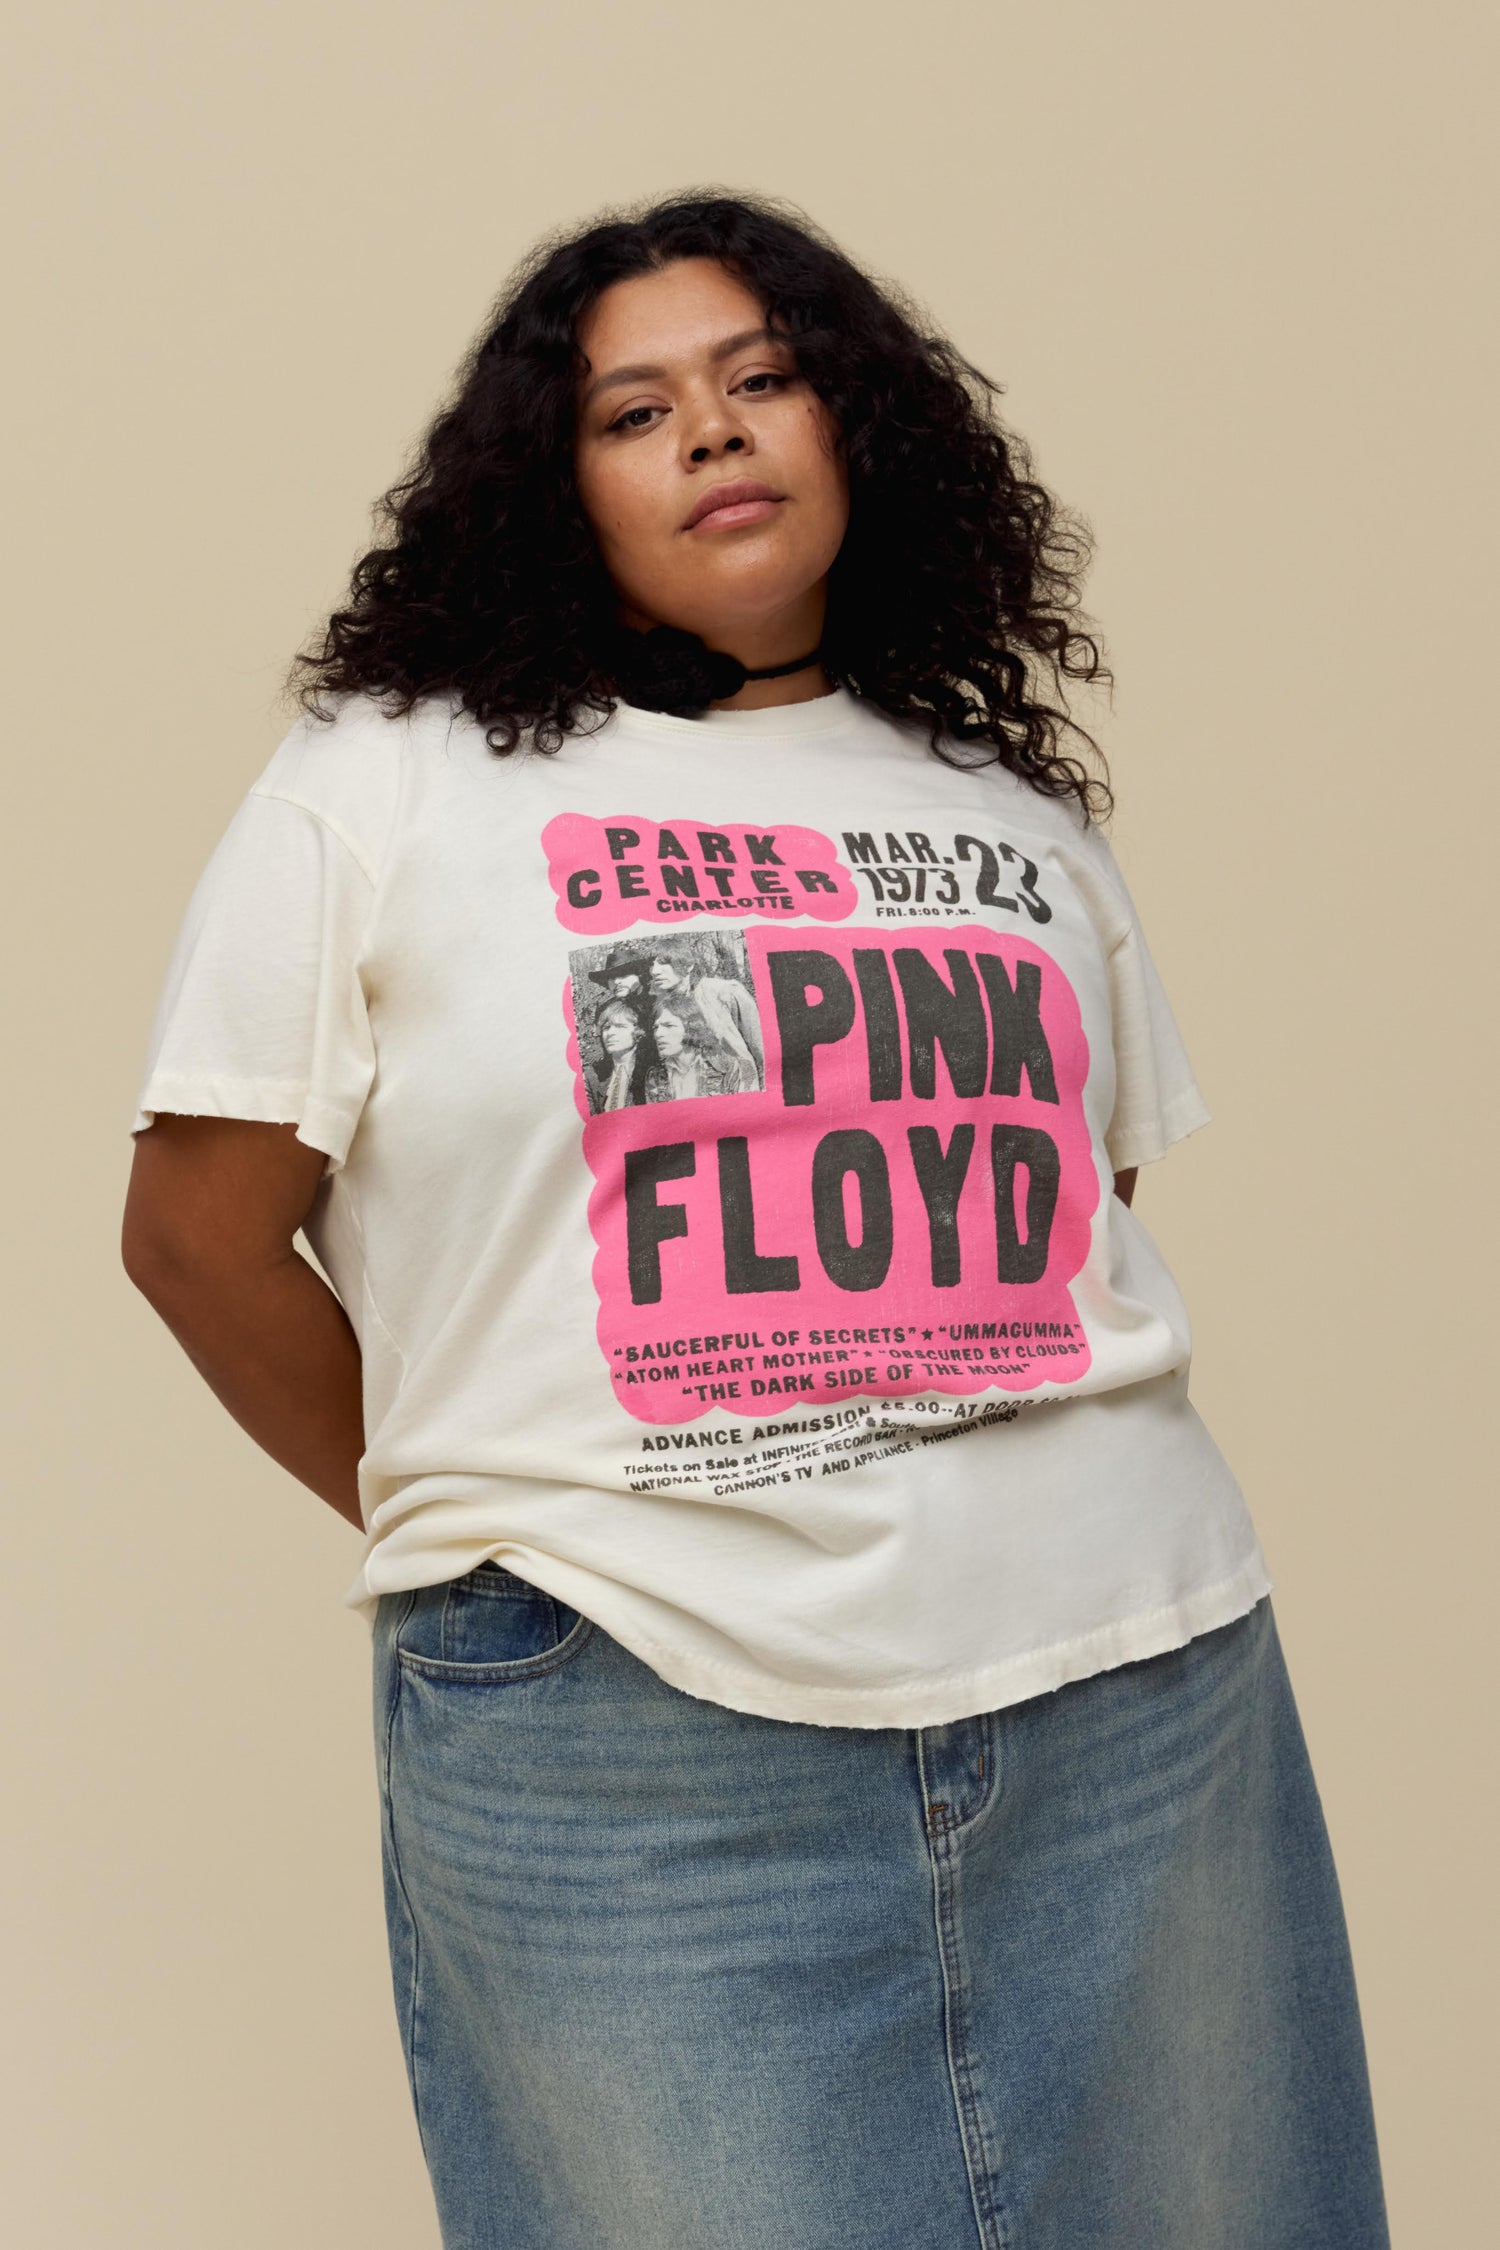 A model featuring a white tee es designed as a true show flyer for Pink Floyd's 1973 Park Center set.